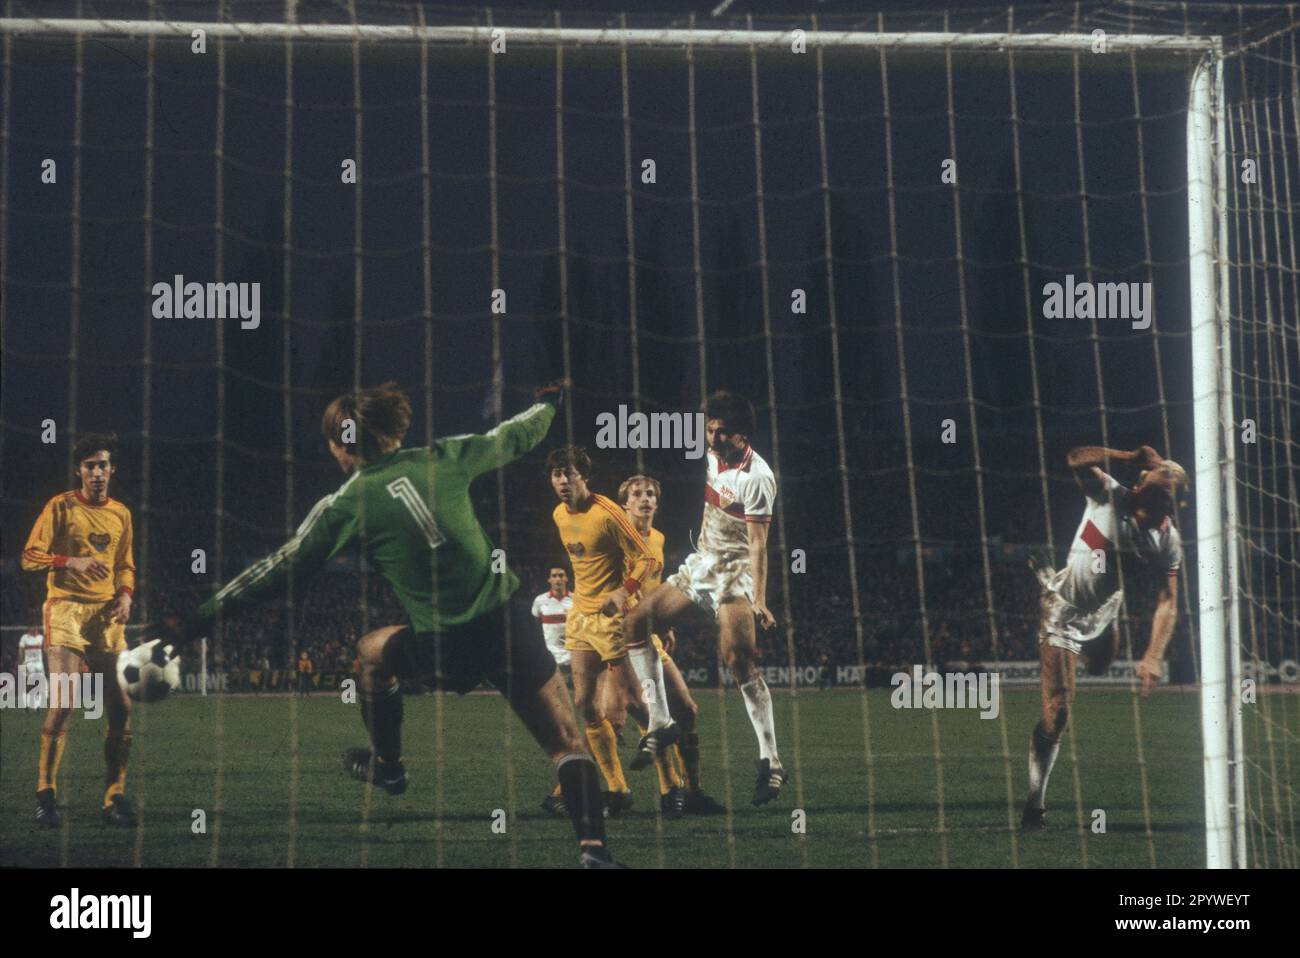 Uefacup 1978/79. Round of 16: VFB Stuttgart - Dukla Prague 4:1/22.11.1978. Goal area scene. For journalistic use only! Only for editorial use! [automated translation] Stock Photo